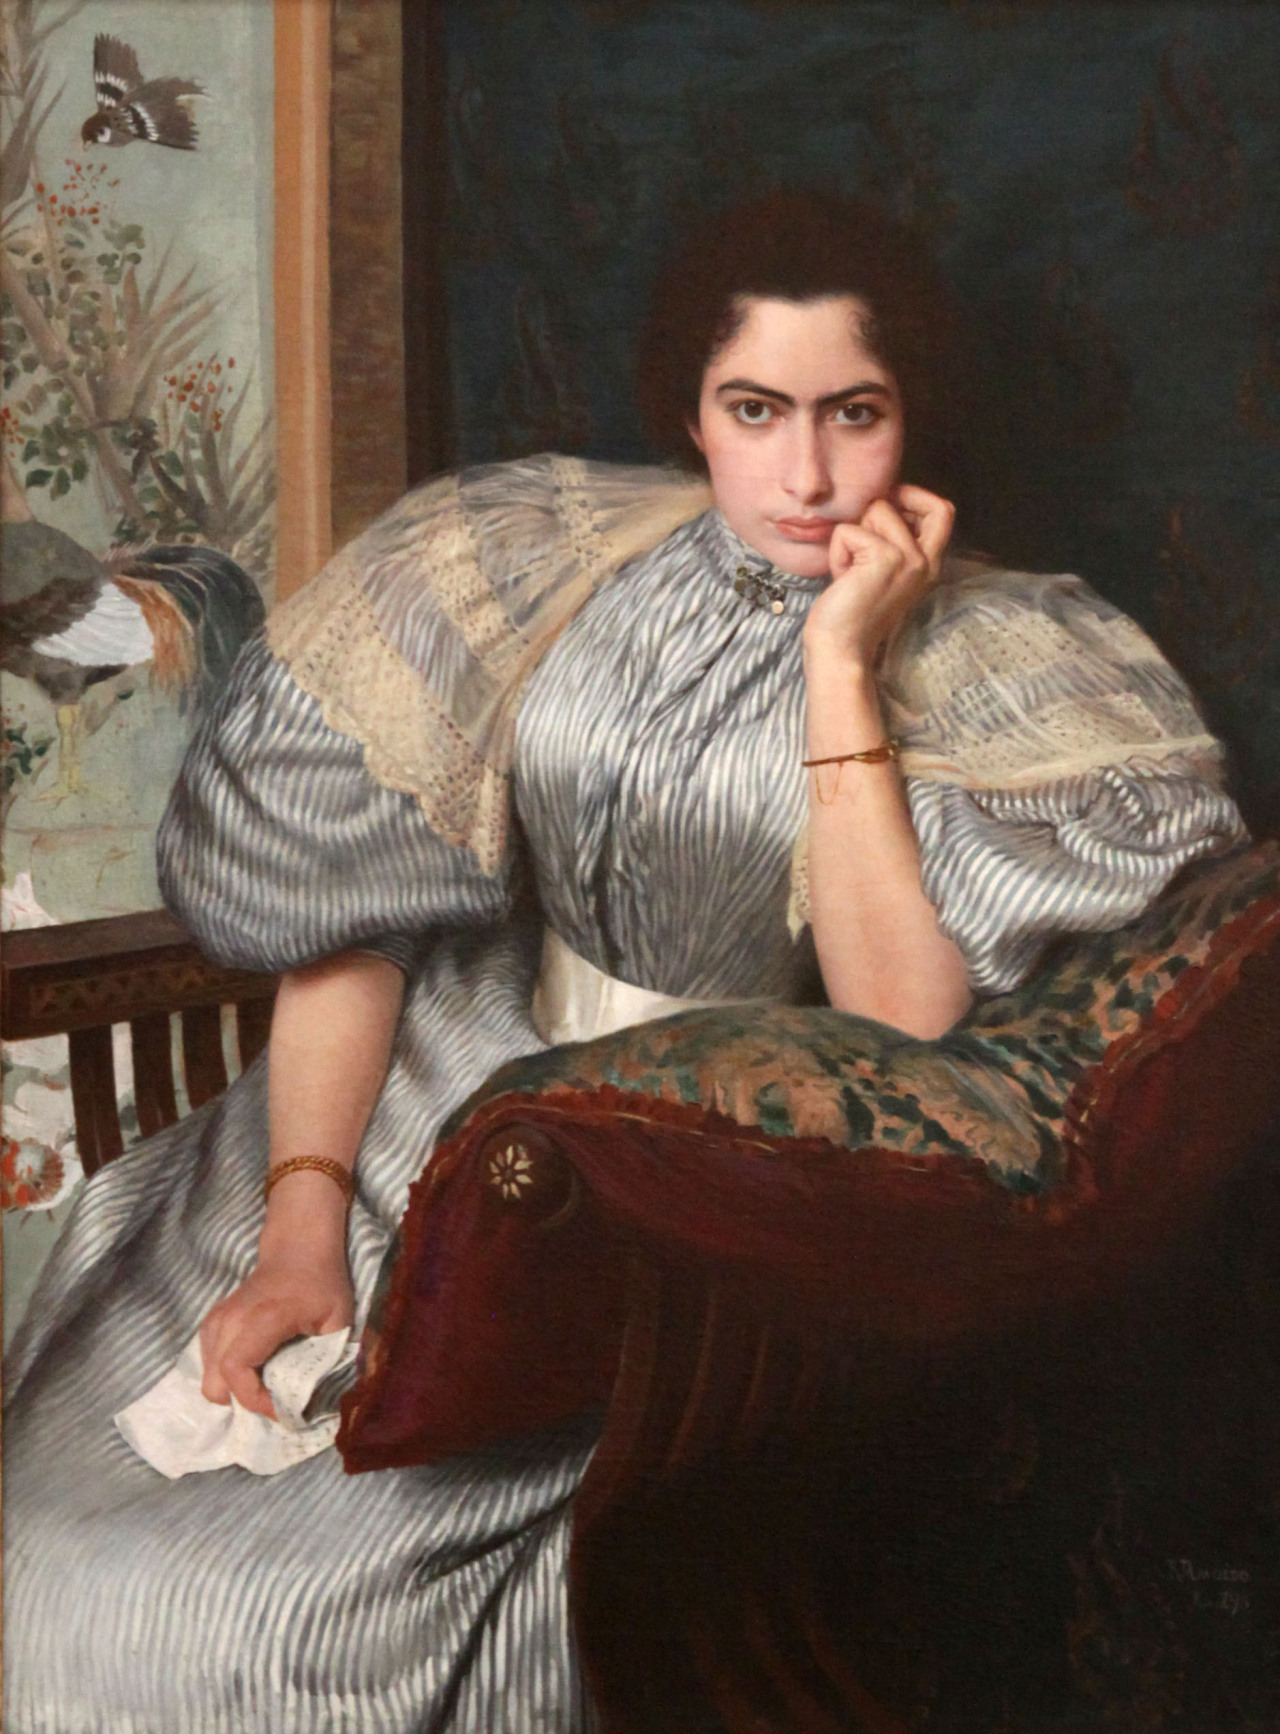 More News (1895). Rodolfo Amoedo (Brazilian, 1857-1941). Oil on canvas. Museu Nacional de Belas Artes do Rio de Janeiro.
The lady holds a letter which she had been reading. The news is likely bad as she crumples the letter and stares out into space...